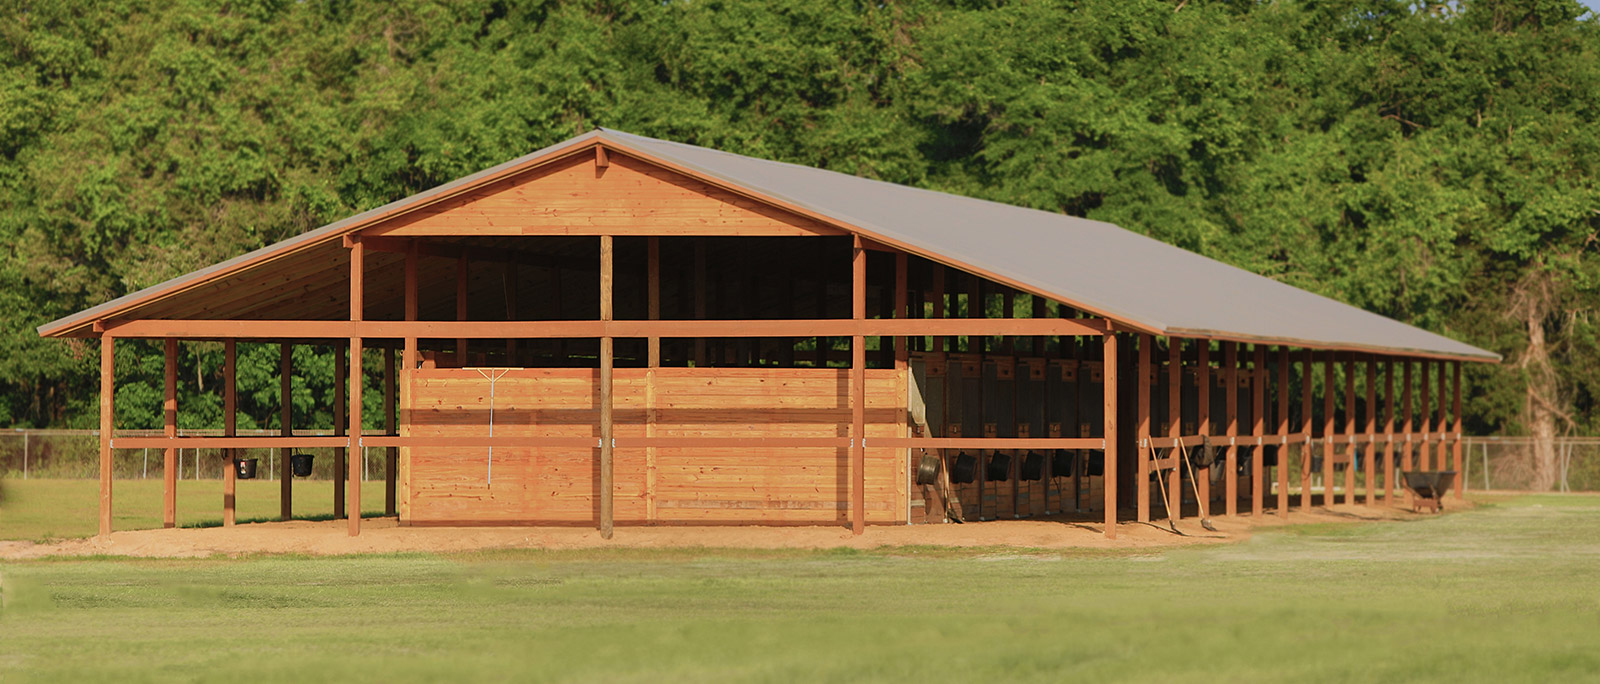 The recently completed stable at the facility